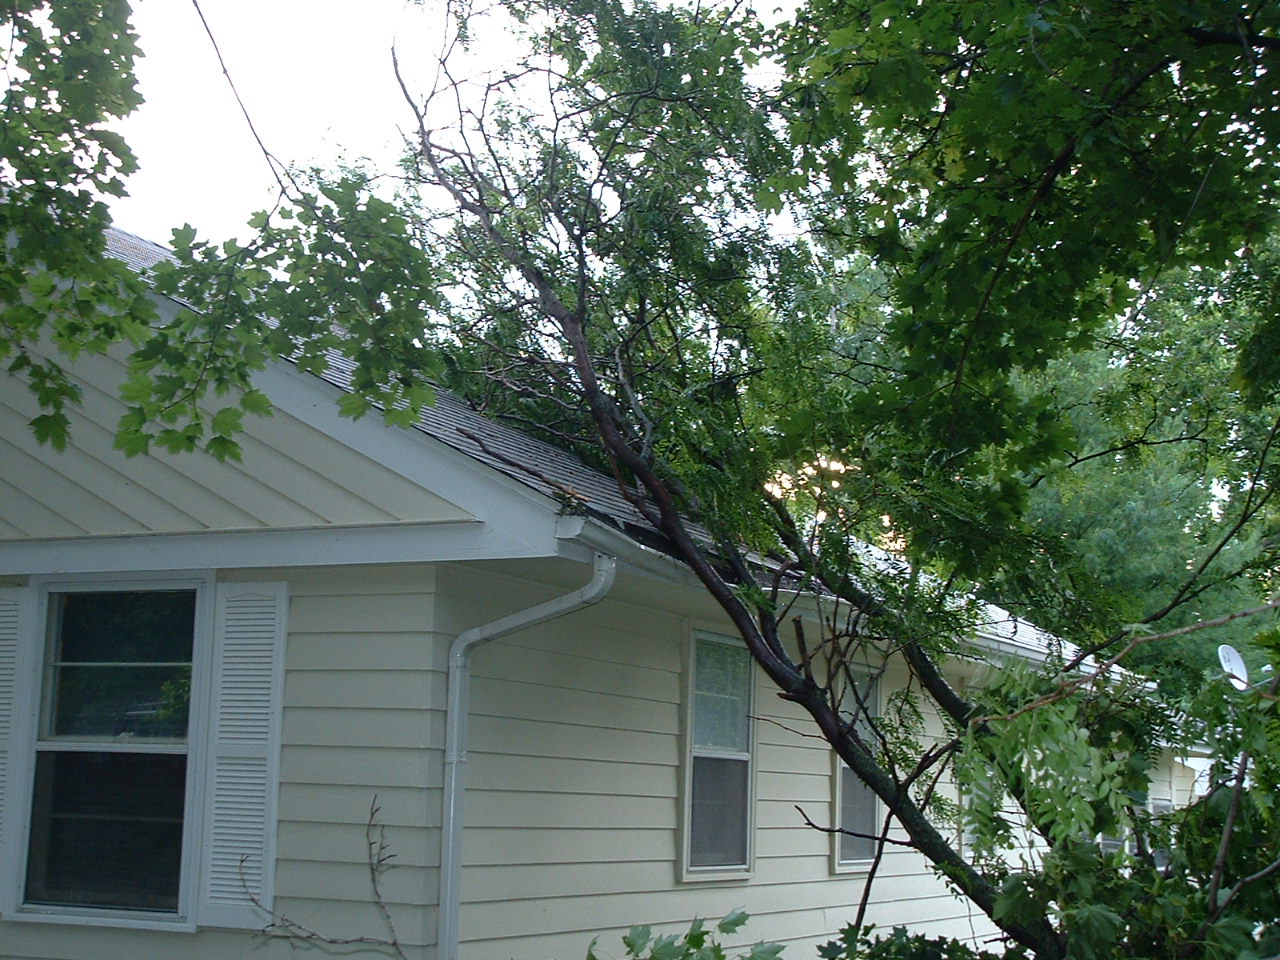 Tree on the house.